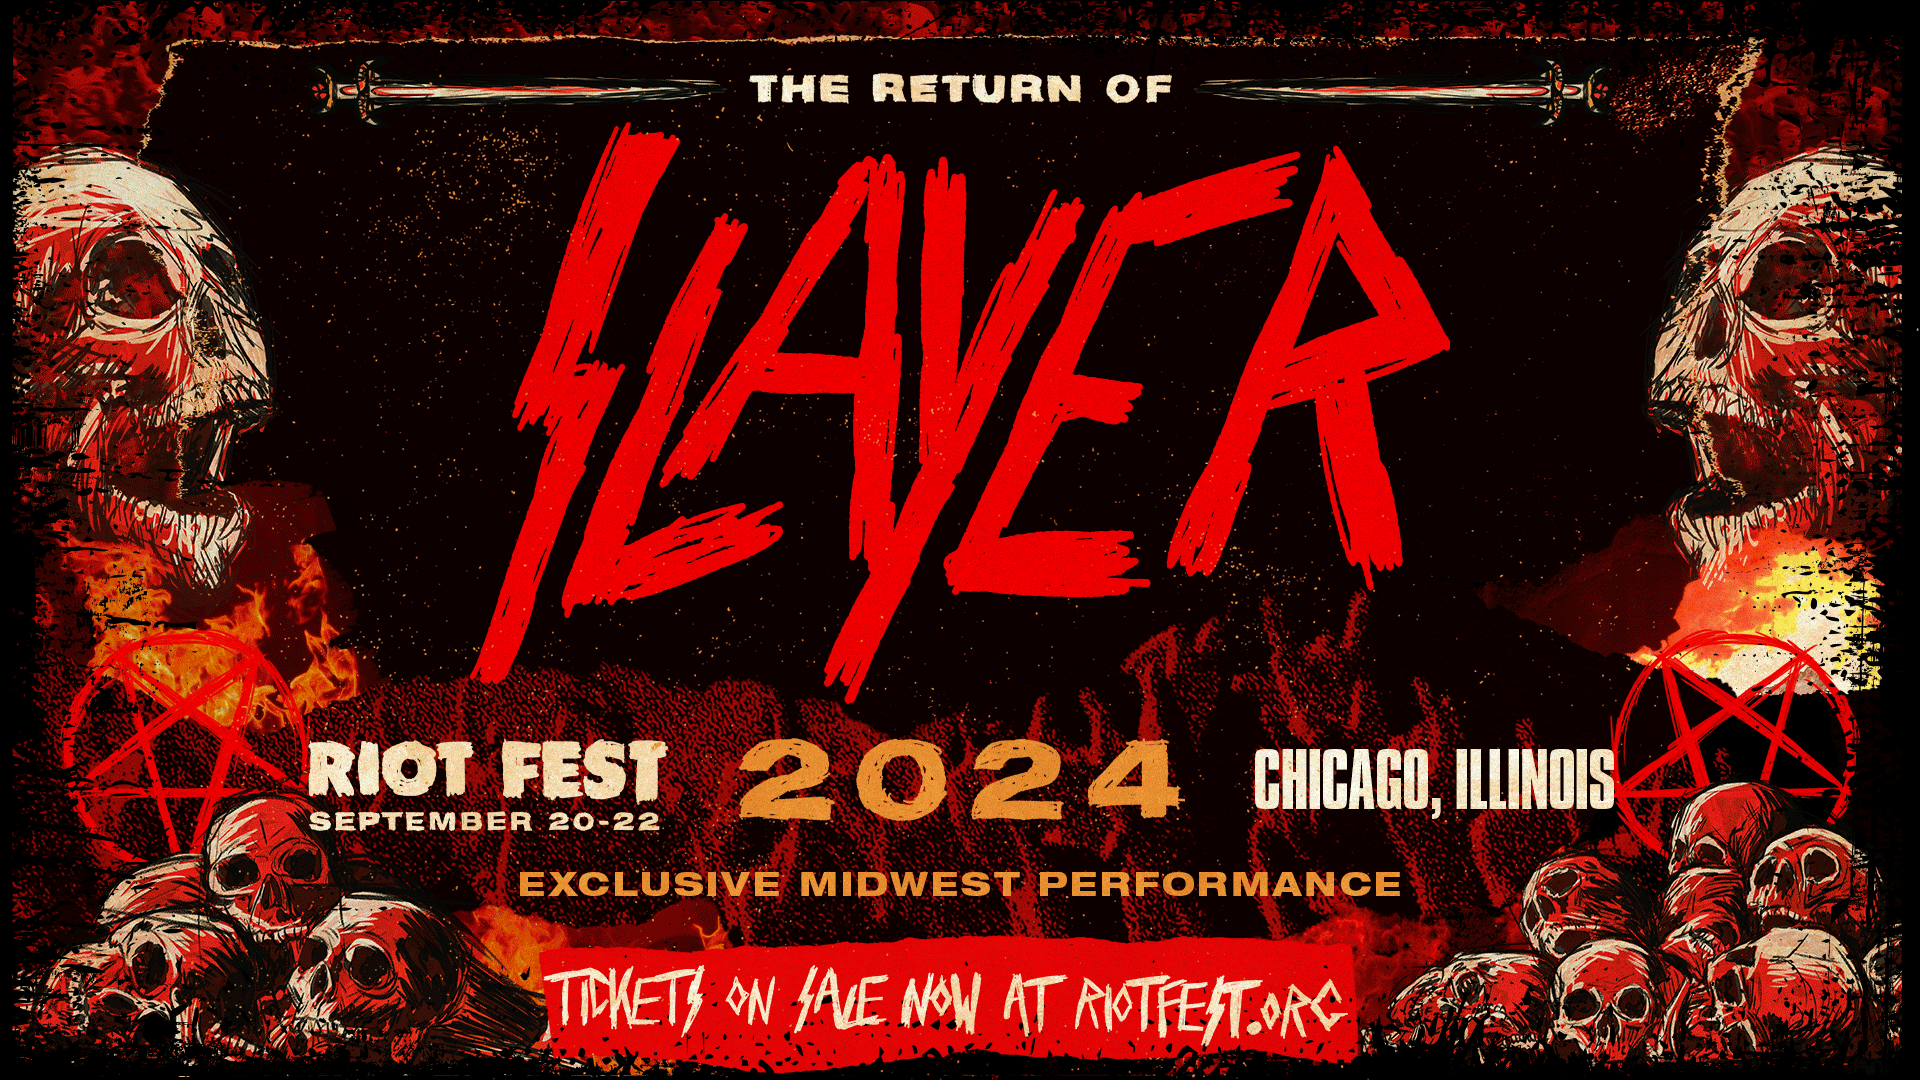 Slayer returns to Riot Fest for an exclusive Midwest performance